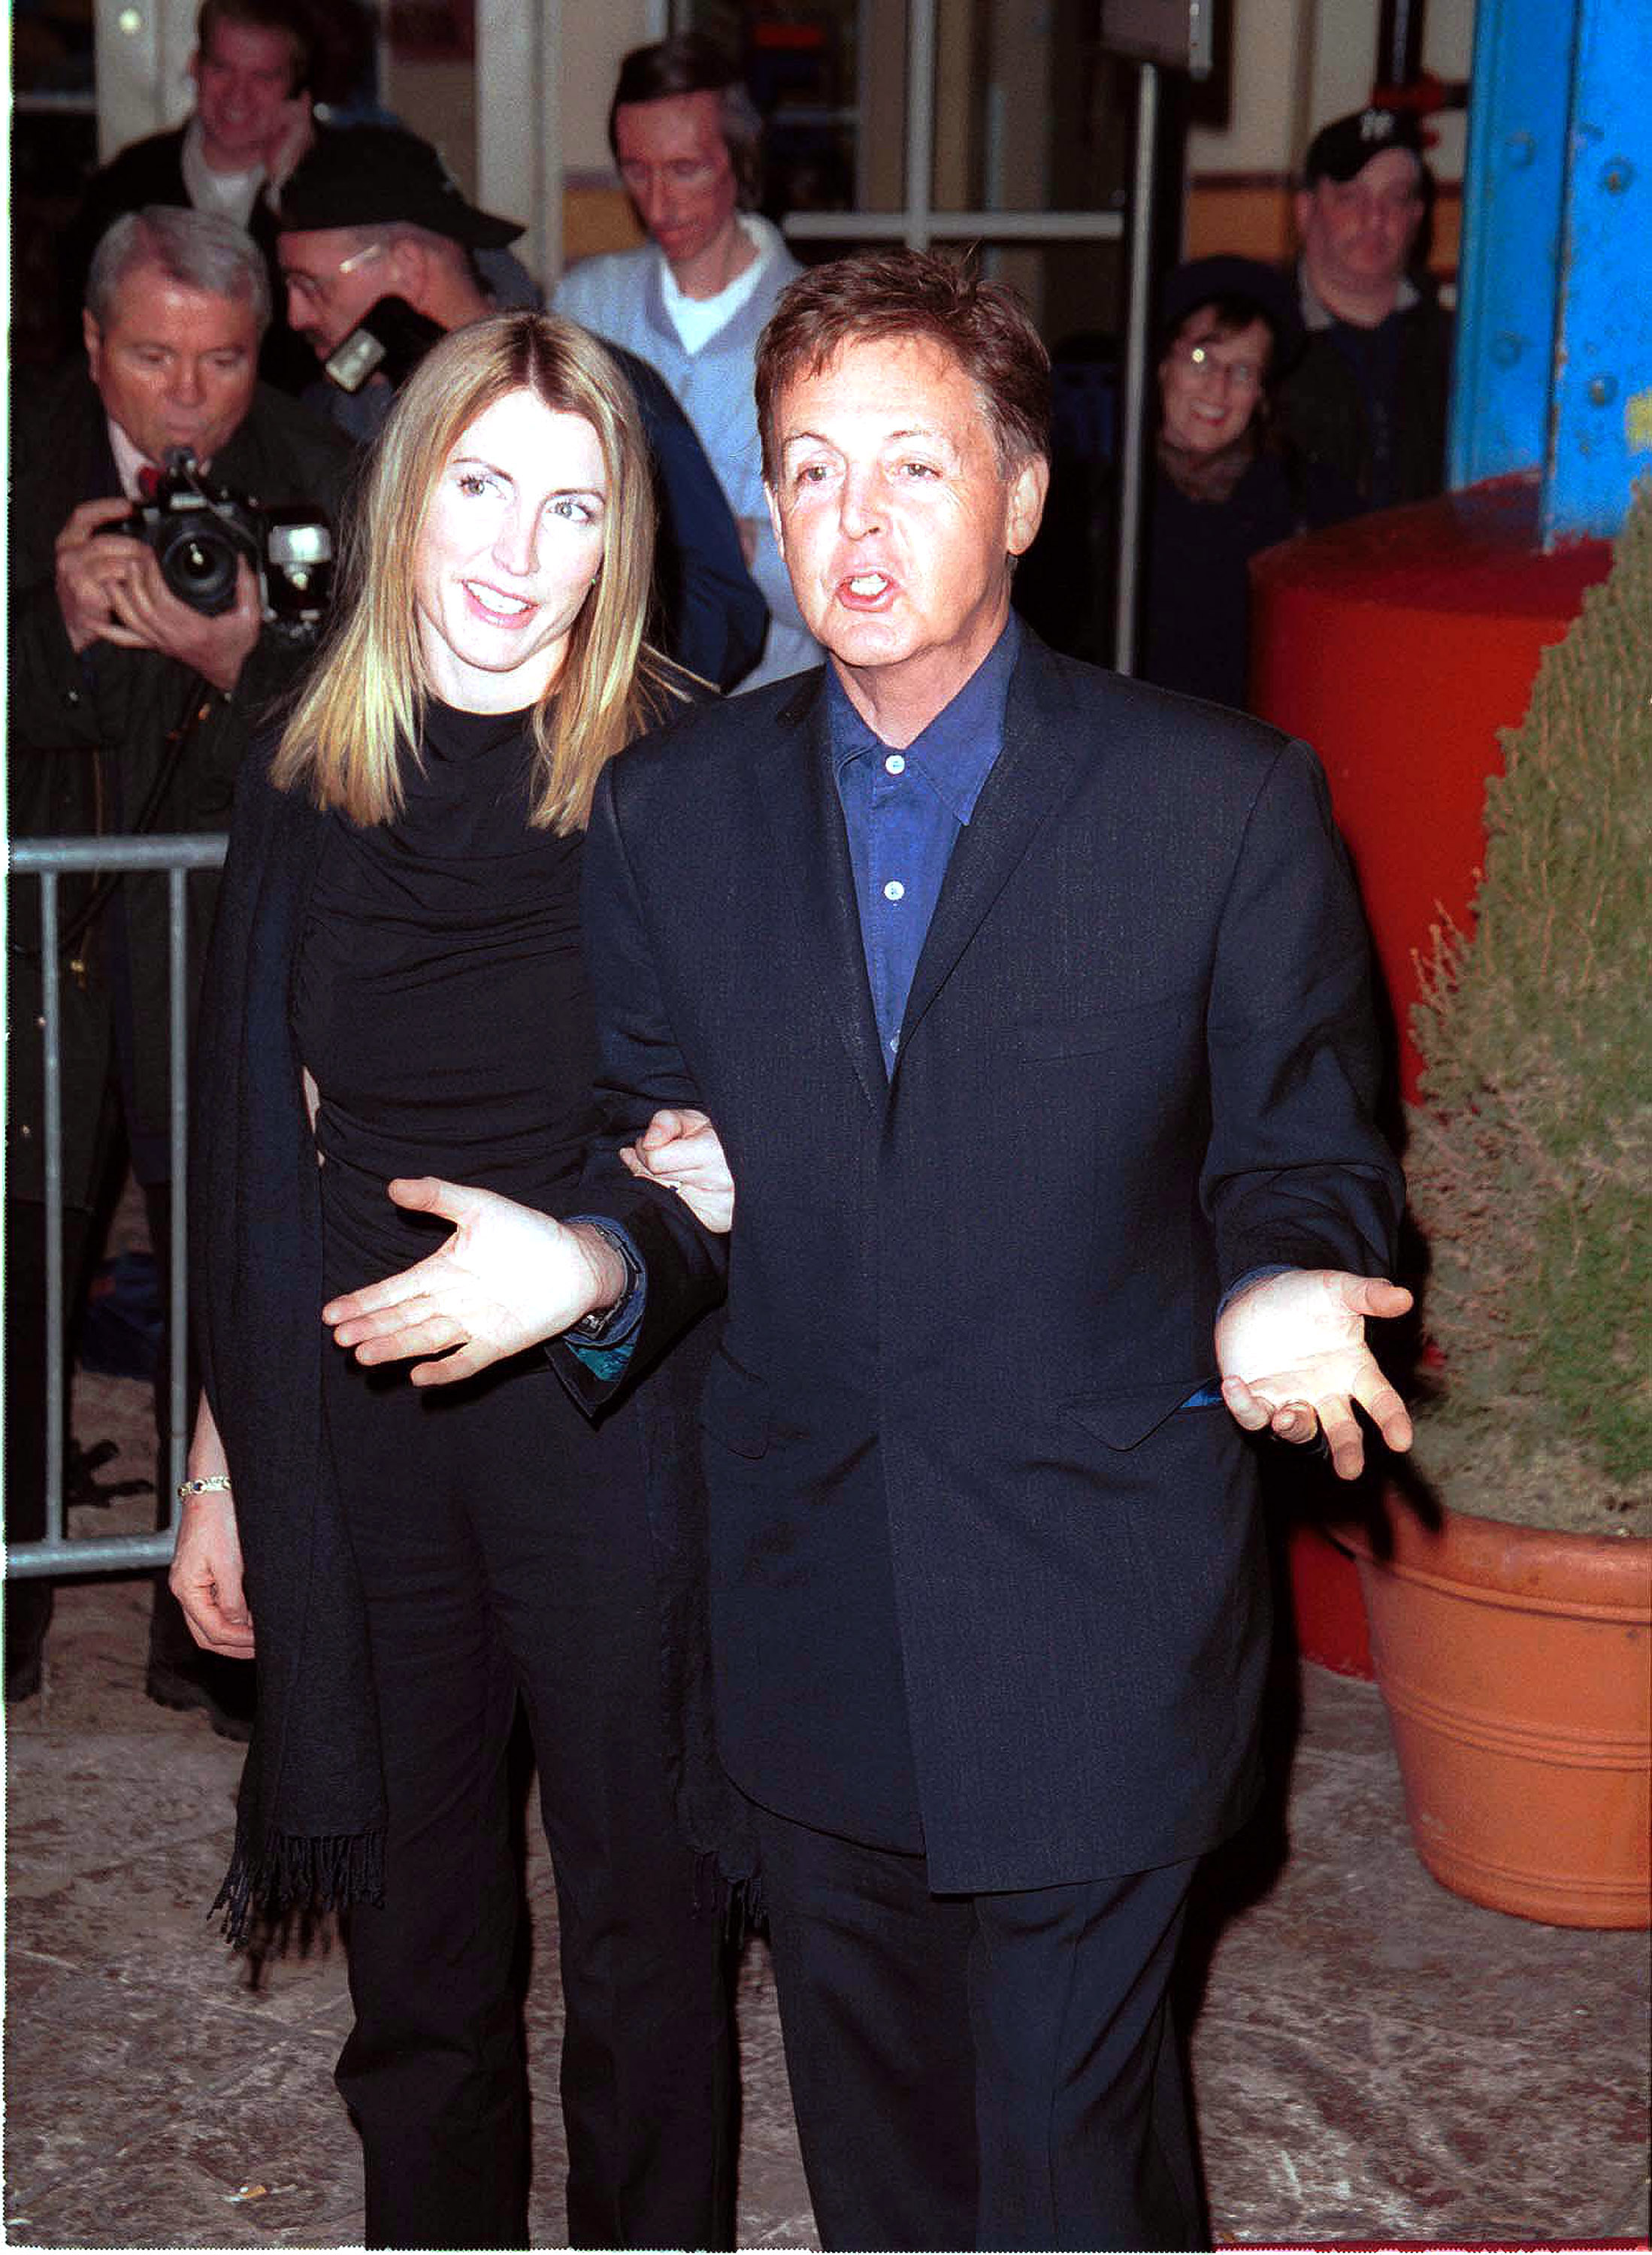 Paul McCartney and Heather Mills attend the 5th Annual Media Spotlight Awards on January 28, 2002 in New York City | Source: Getty Images